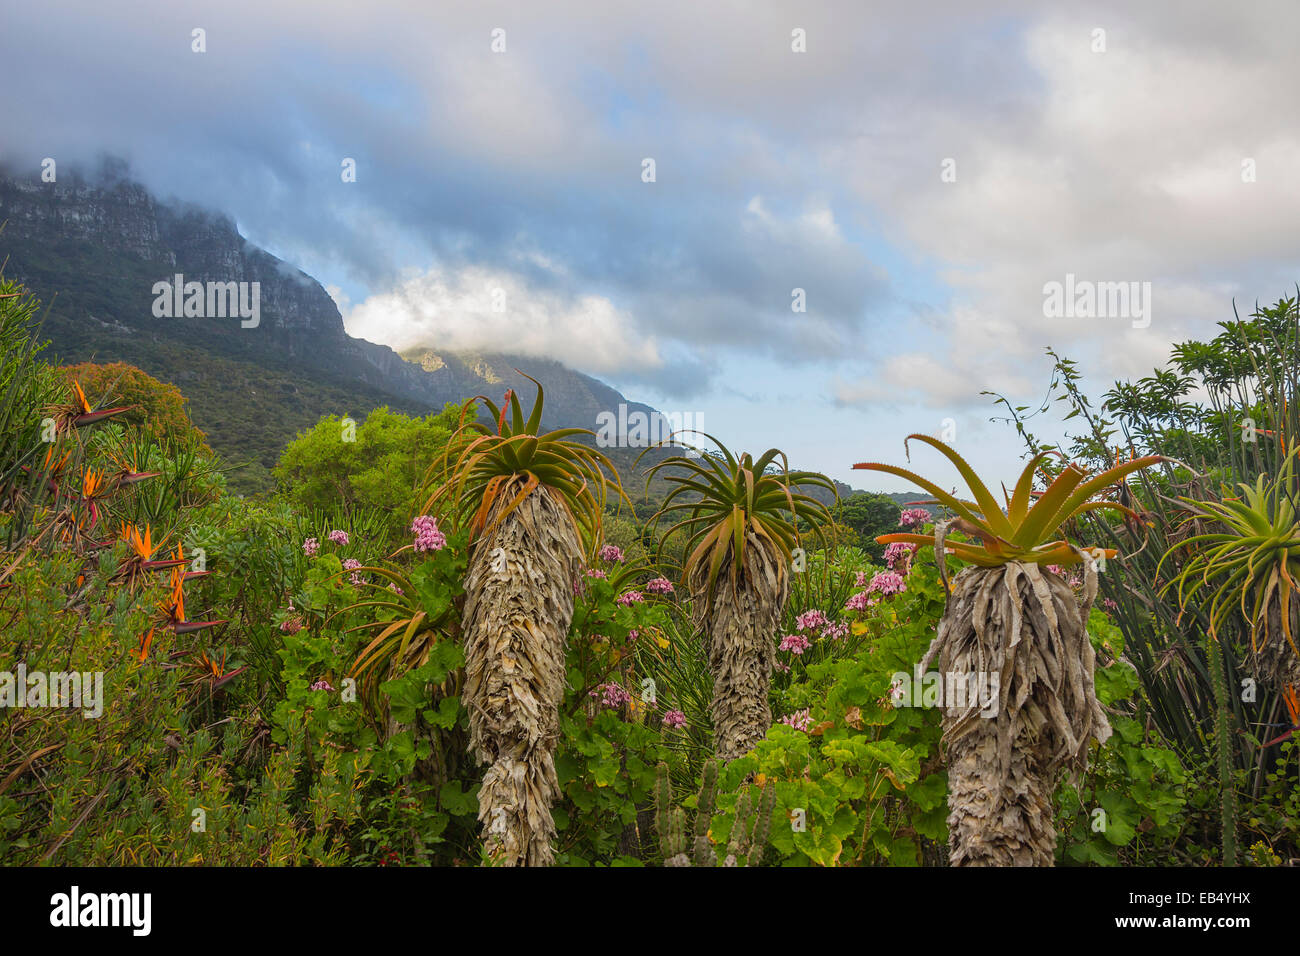 Kirstenbosch Gardens on a partly cloudy day with aloes in the foreground Stock Photo